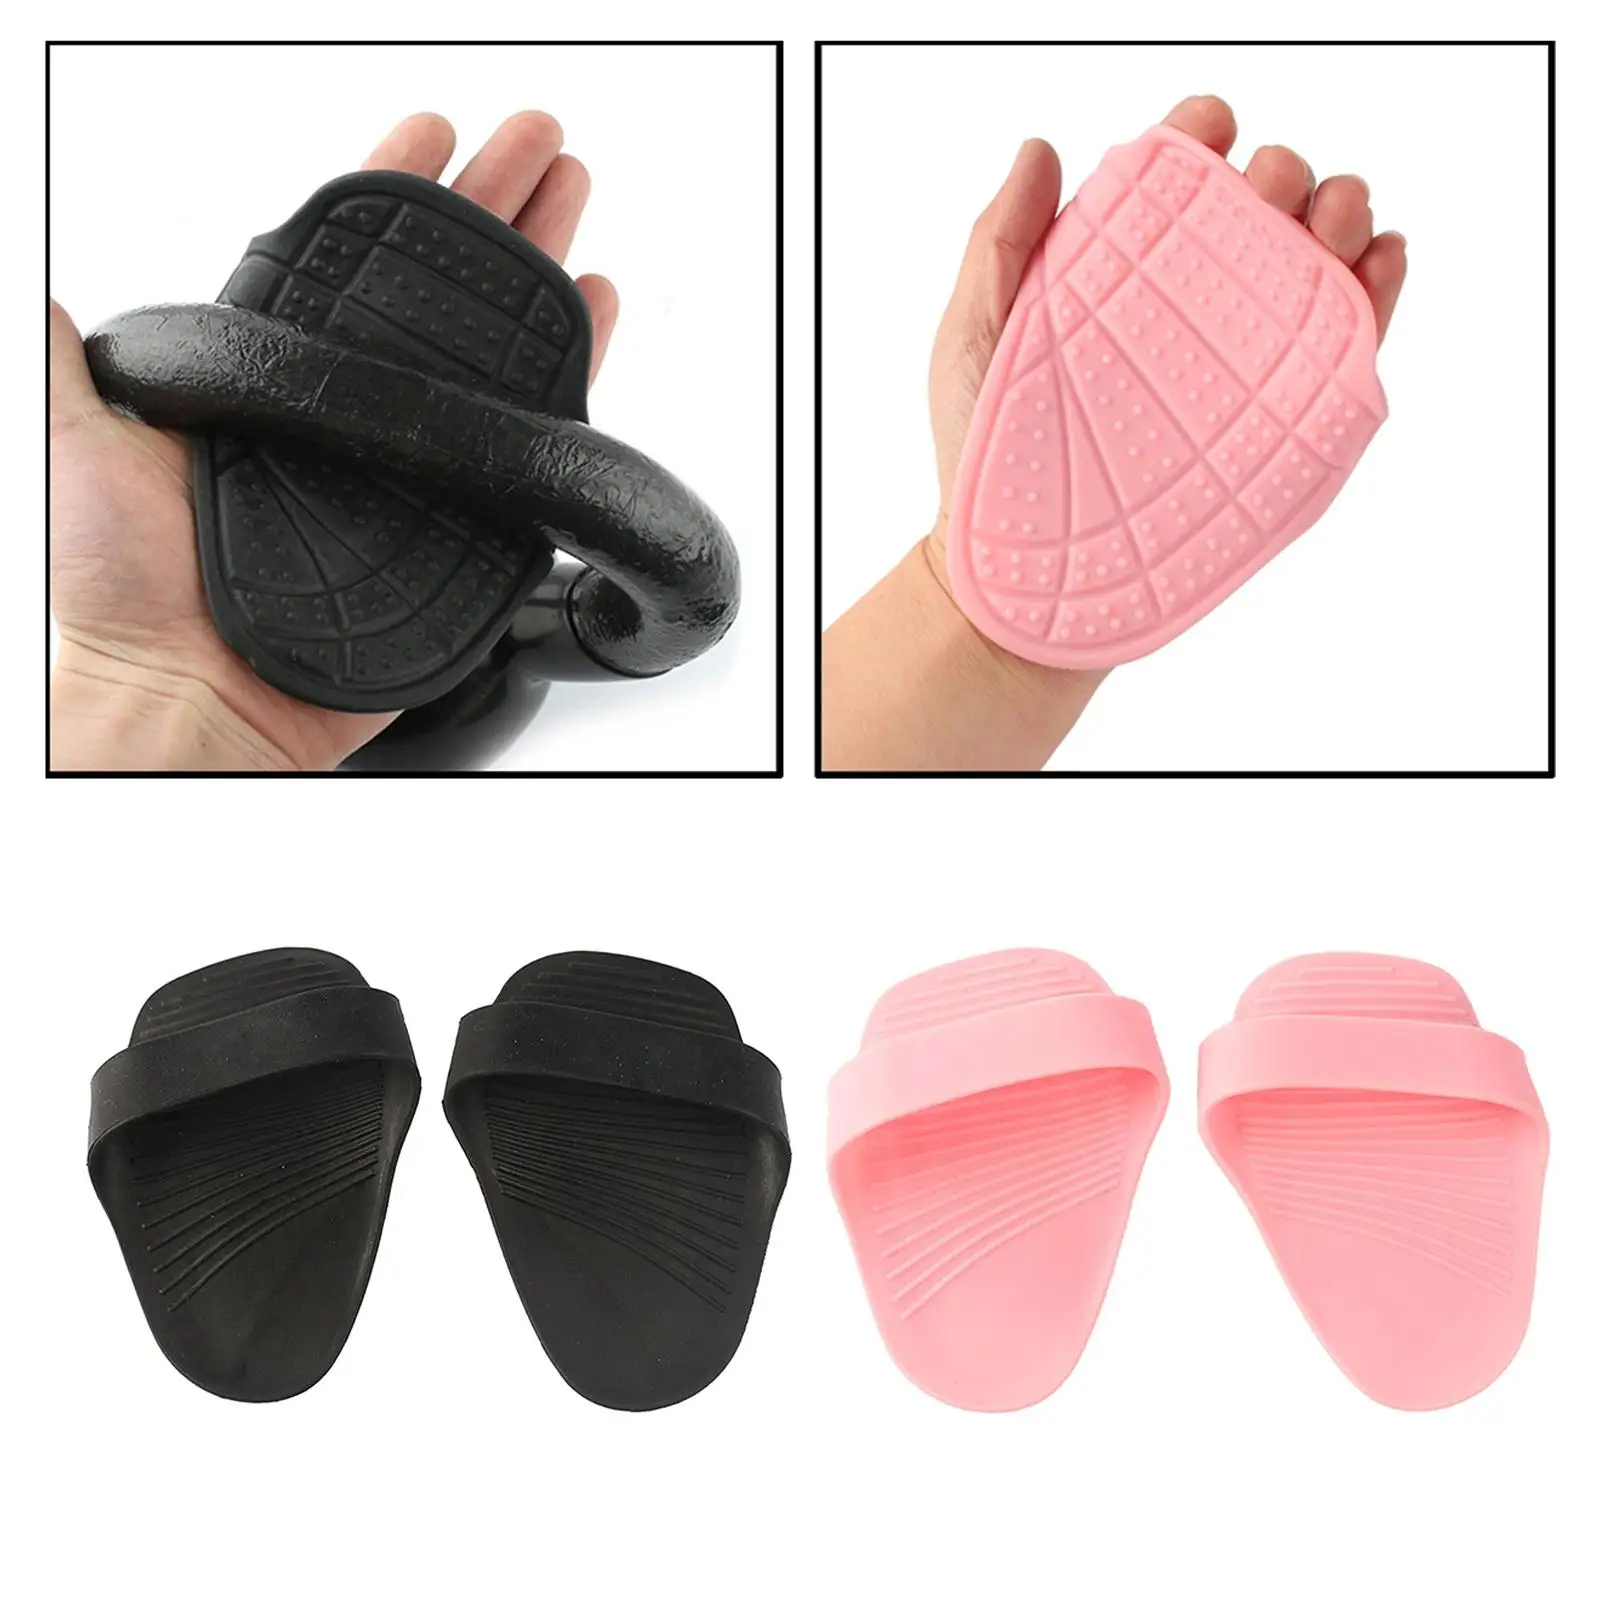 Lifting Grip Pads Hand Palm  handheld  Men Women Anti  Workout Gloves for Weightlifting Bodybuilding Dumbbell Grips Pads